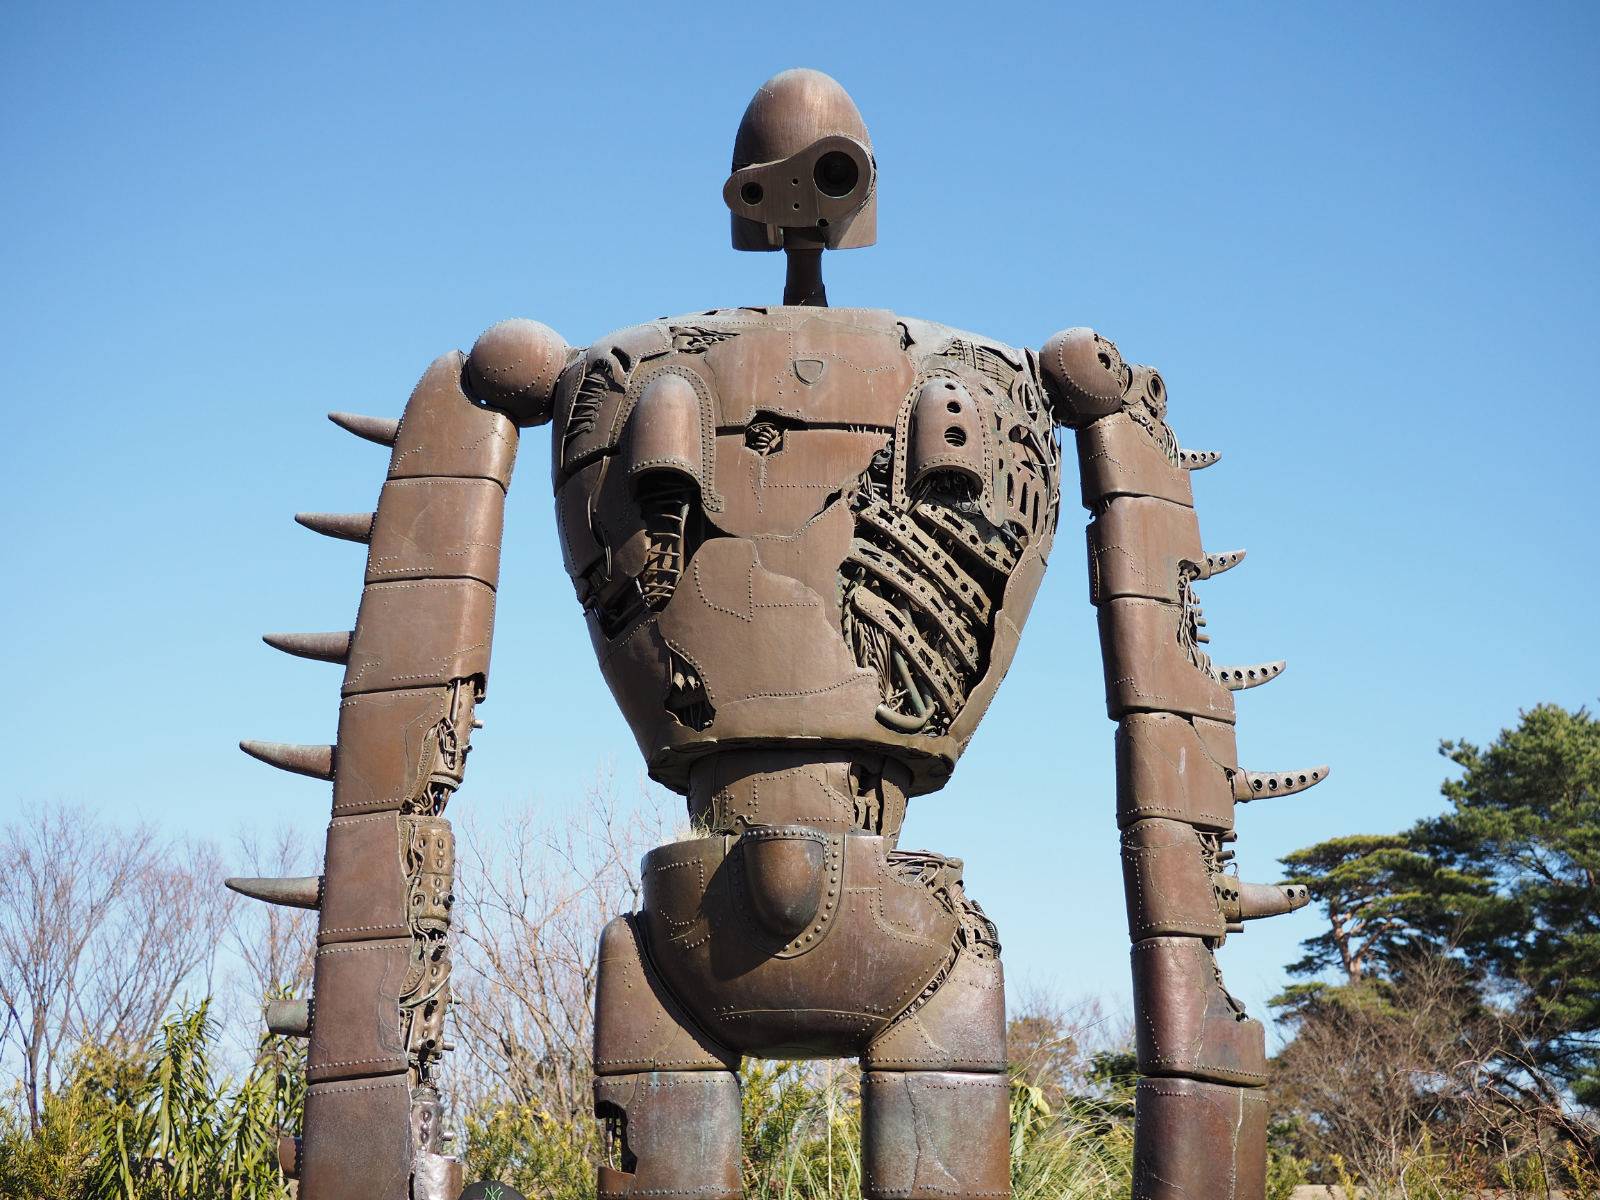 Front of the robot from Castle in the Sky